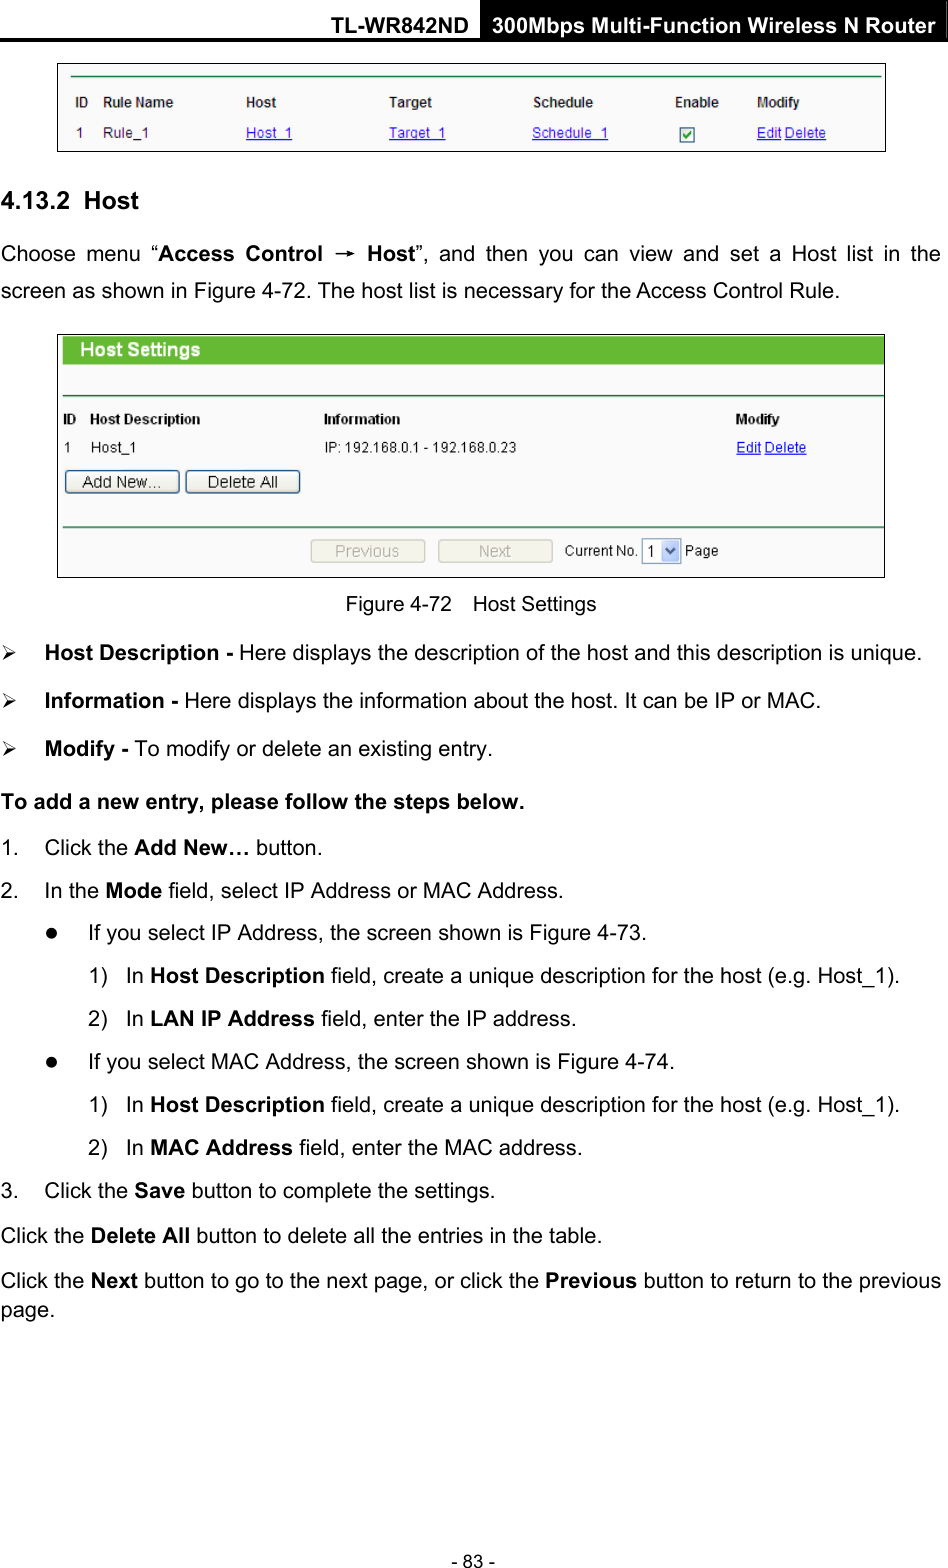 TL-WR842ND 300Mbps Multi-Function Wireless N Router - 83 -  4.13.2  Host Choose menu “Access Control → Host”, and then you can view and set a Host list in the screen as shown in Figure 4-72. The host list is necessary for the Access Control Rule.  Figure 4-72  Host Settings ¾ Host Description - Here displays the description of the host and this description is unique.   ¾ Information - Here displays the information about the host. It can be IP or MAC.   ¾ Modify - To modify or delete an existing entry.   To add a new entry, please follow the steps below. 1. Click the Add New… button. 2. In the Mode field, select IP Address or MAC Address. z If you select IP Address, the screen shown is Figure 4-73.  1) In Host Description field, create a unique description for the host (e.g. Host_1).   2) In LAN IP Address field, enter the IP address. z If you select MAC Address, the screen shown is Figure 4-74.  1) In Host Description field, create a unique description for the host (e.g. Host_1). 2) In MAC Address field, enter the MAC address. 3. Click the Save button to complete the settings. Click the Delete All button to delete all the entries in the table. Click the Next button to go to the next page, or click the Previous button to return to the previous page. 